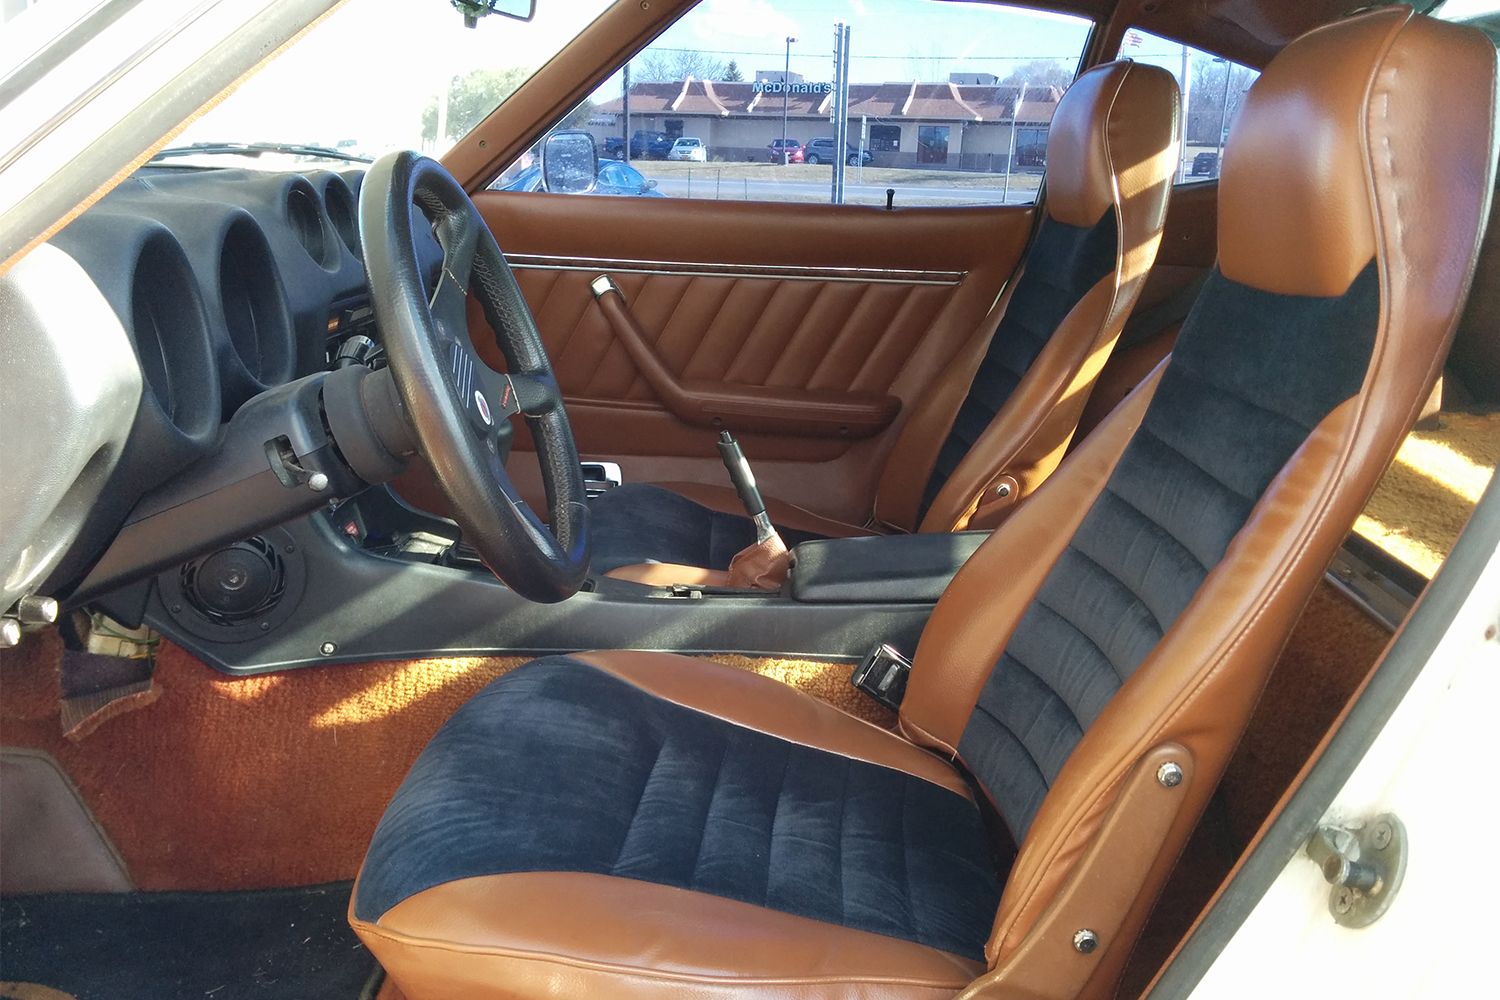 The black and tan interior of a 1978 Datsun 280Z sports car. Here's what it's like to own one.